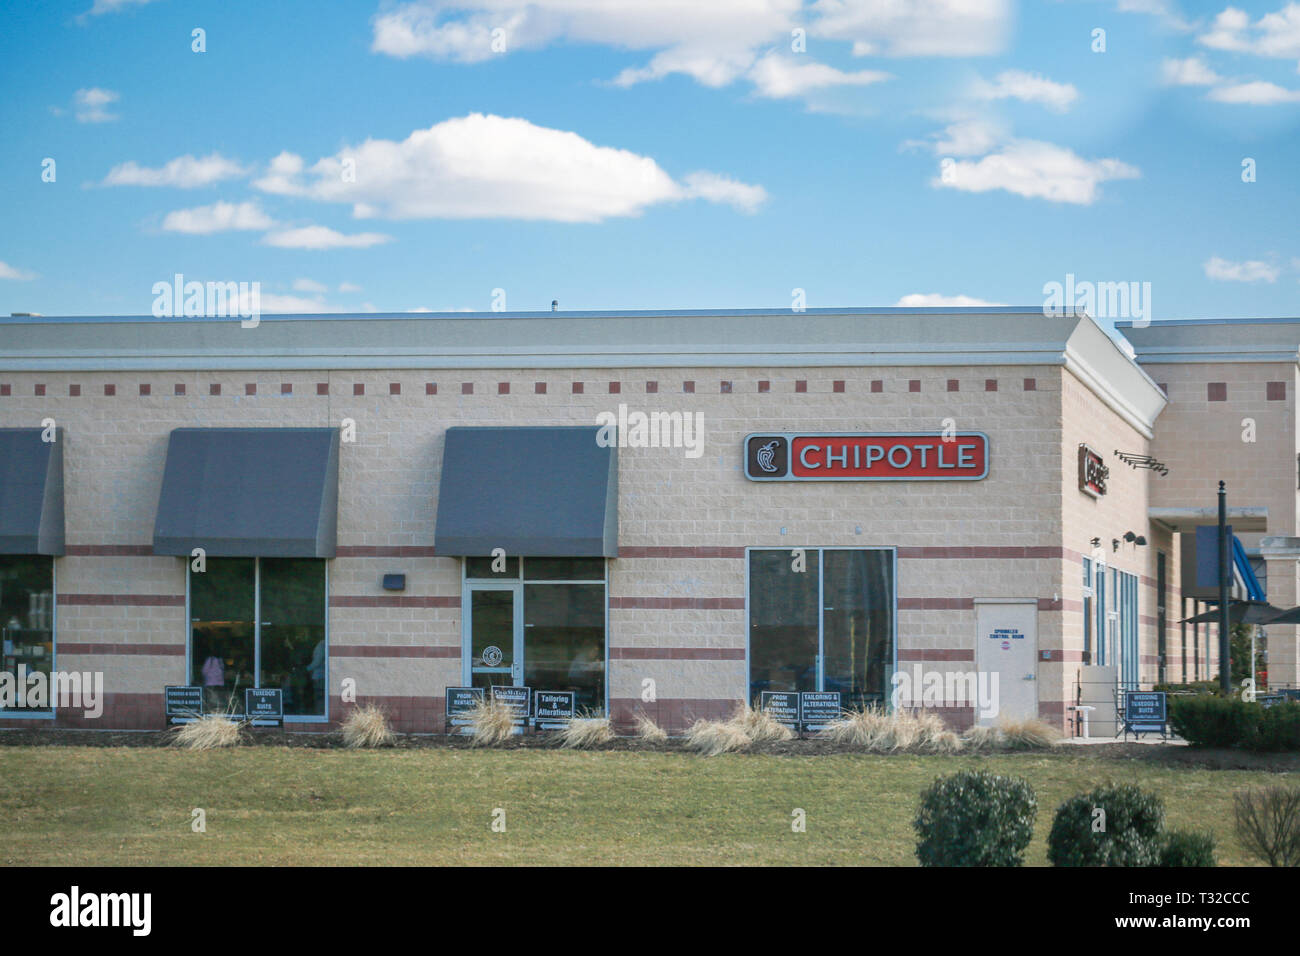 Princeton New Jersey March 16 2019: Chipolte Mexican Grill sign. Chipolte is a chain of casual dining restaurants specializing in burritos and tacos. Stock Photo